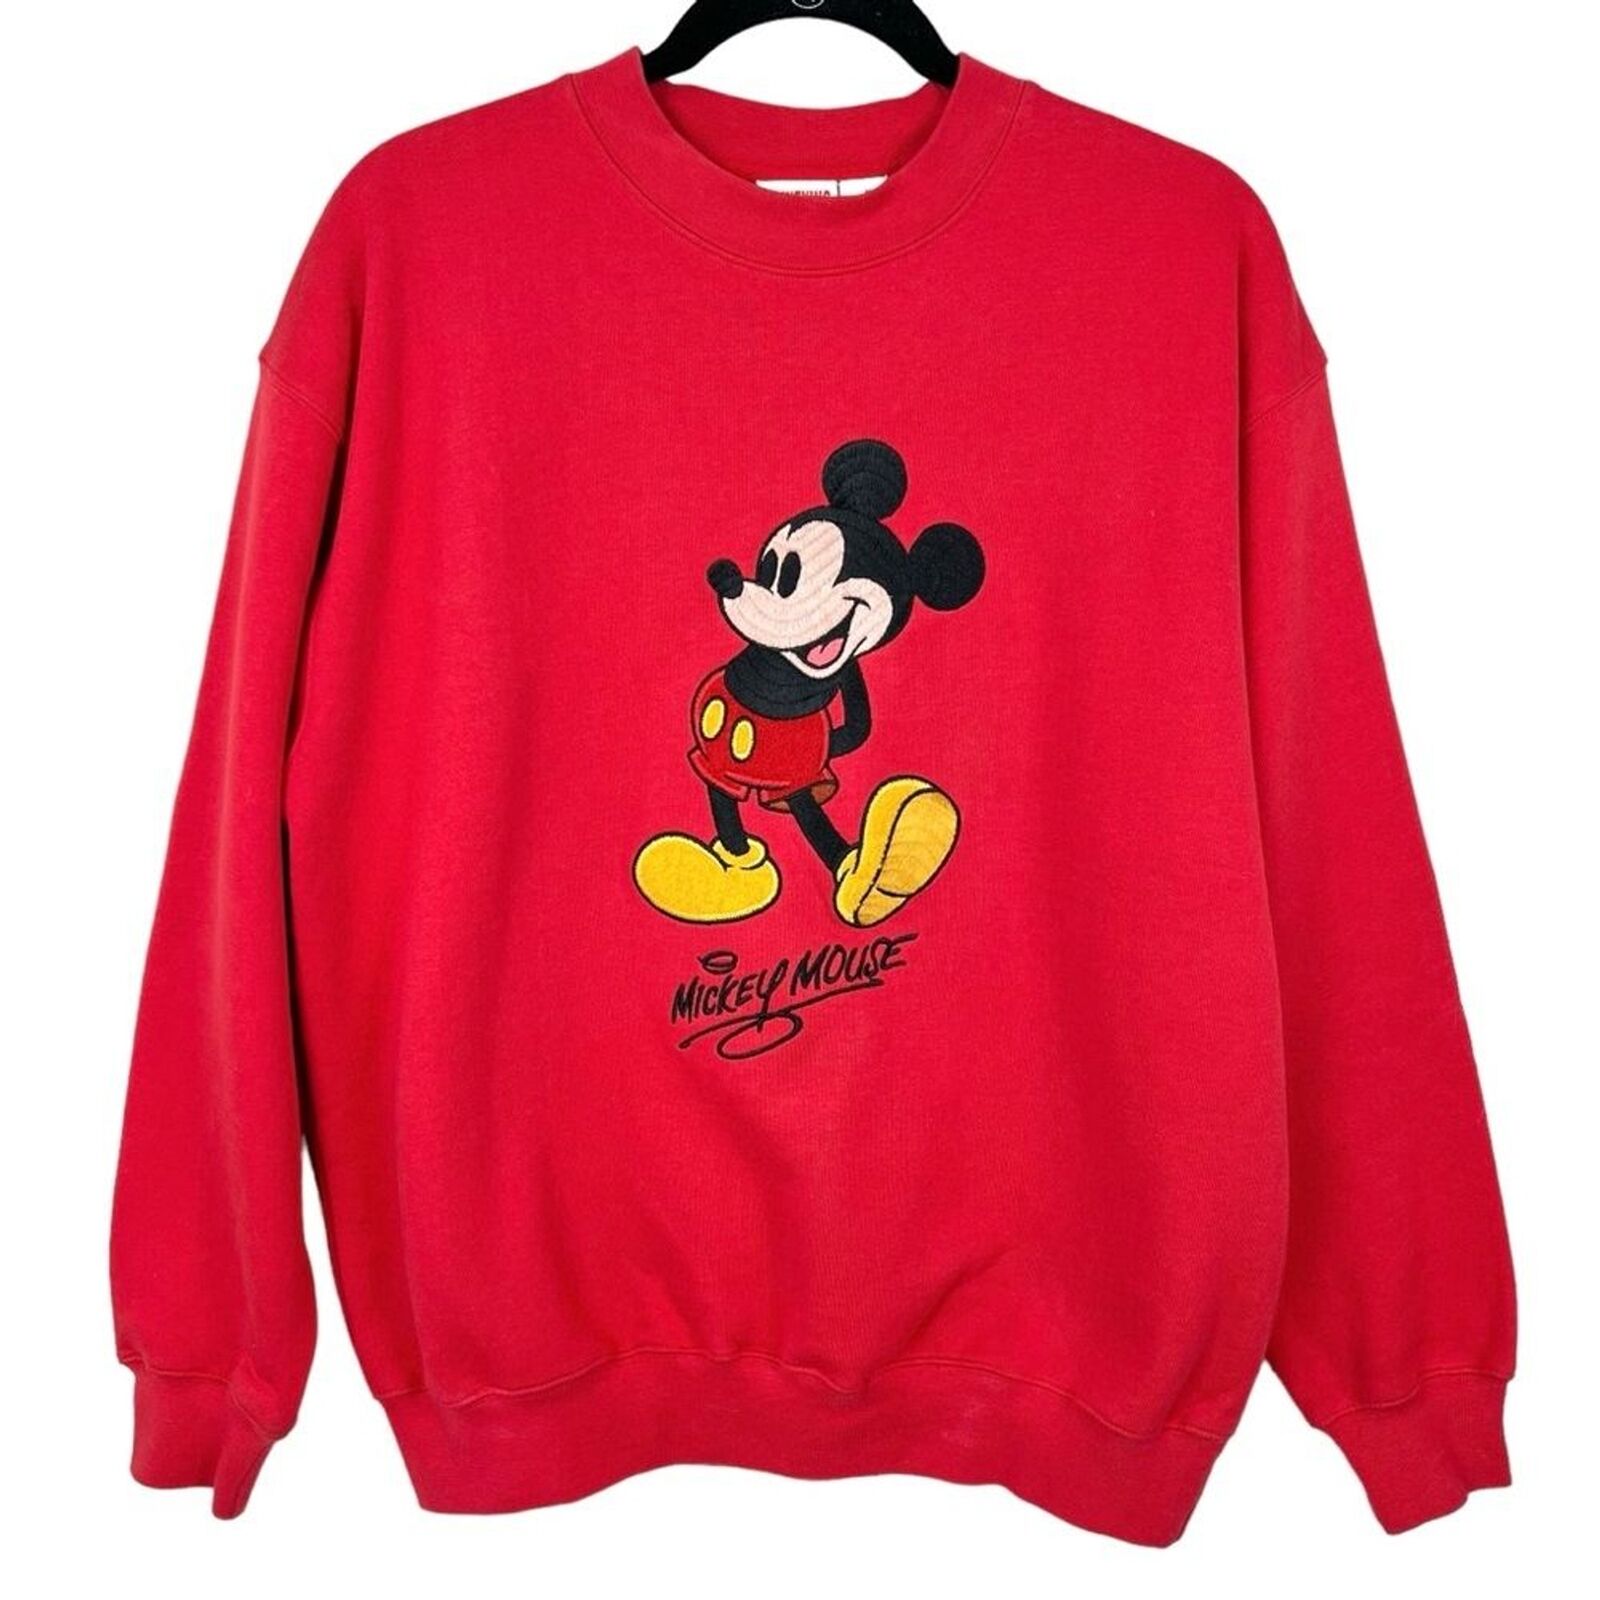 VINTAGE Disney Mickey Inc Embroidered Sweater Sz M Red Crew Pullover Knit 90s